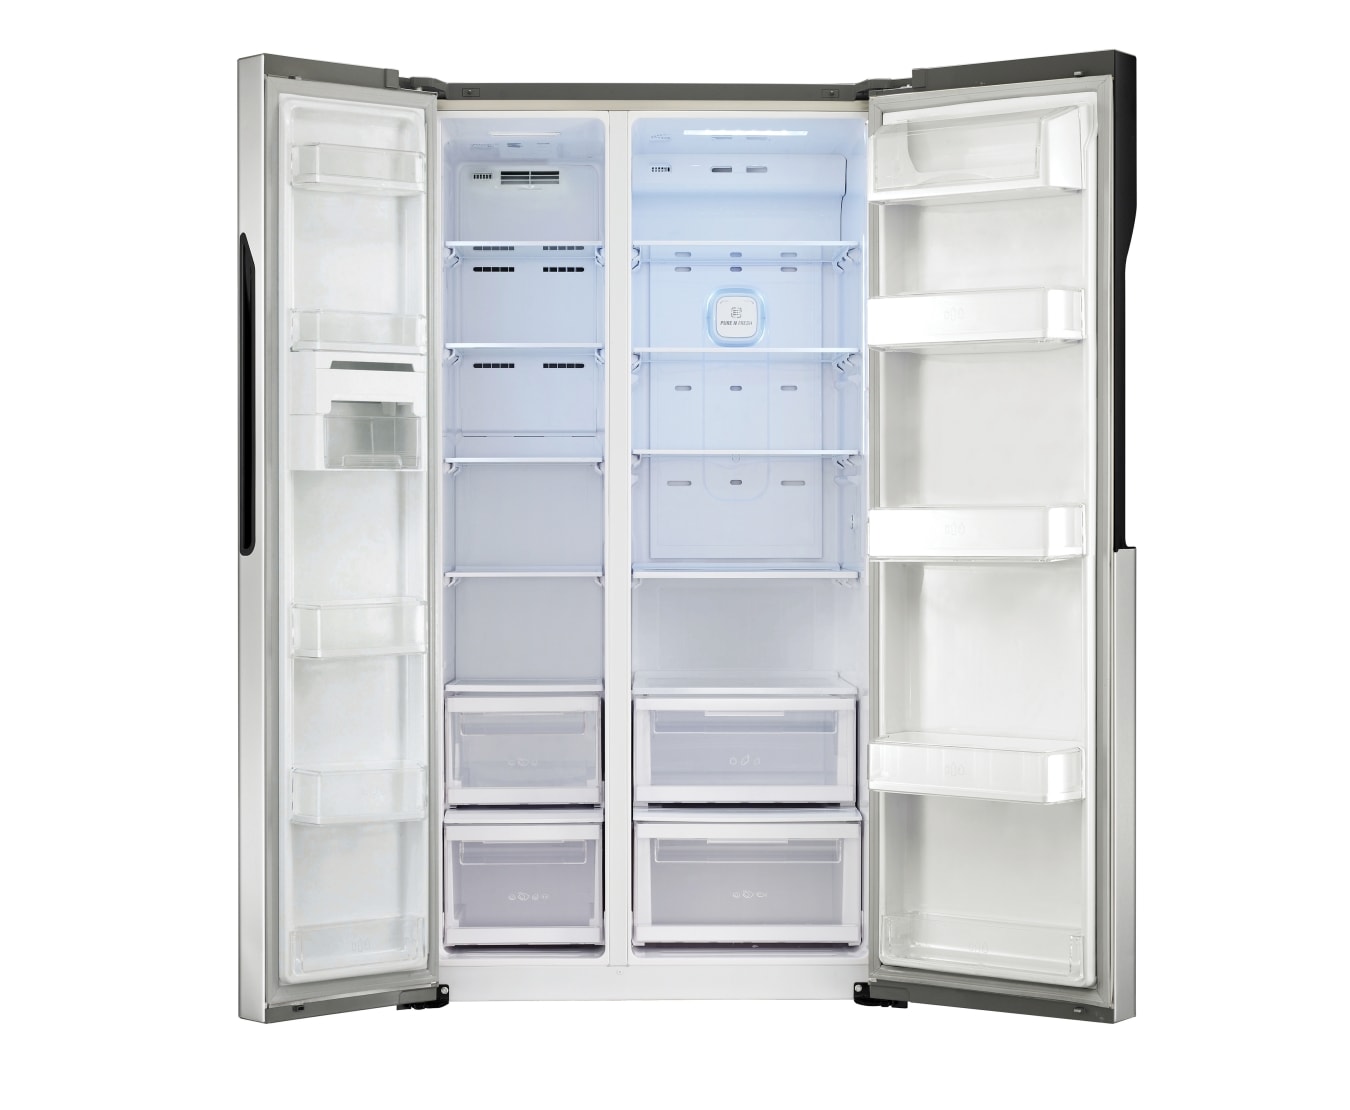 gs-b679pl-679l-side-by-side-refrigerator-with-3-star-energy-rating